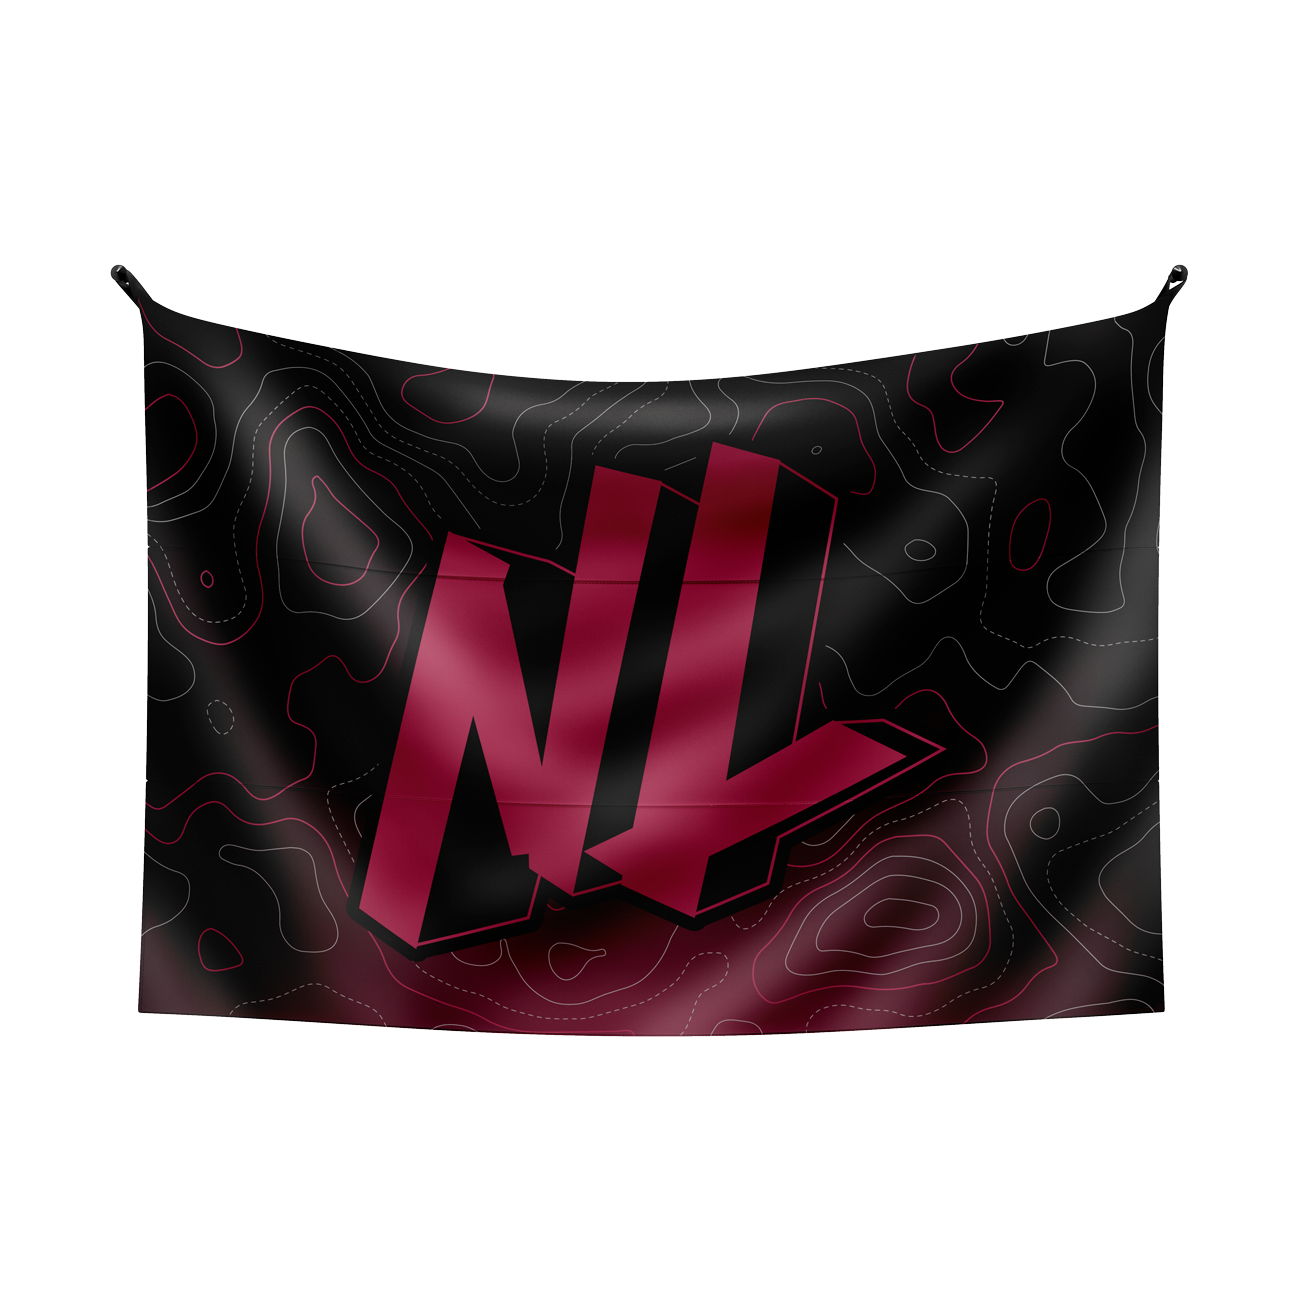 Newlook Gaming Pro Flag